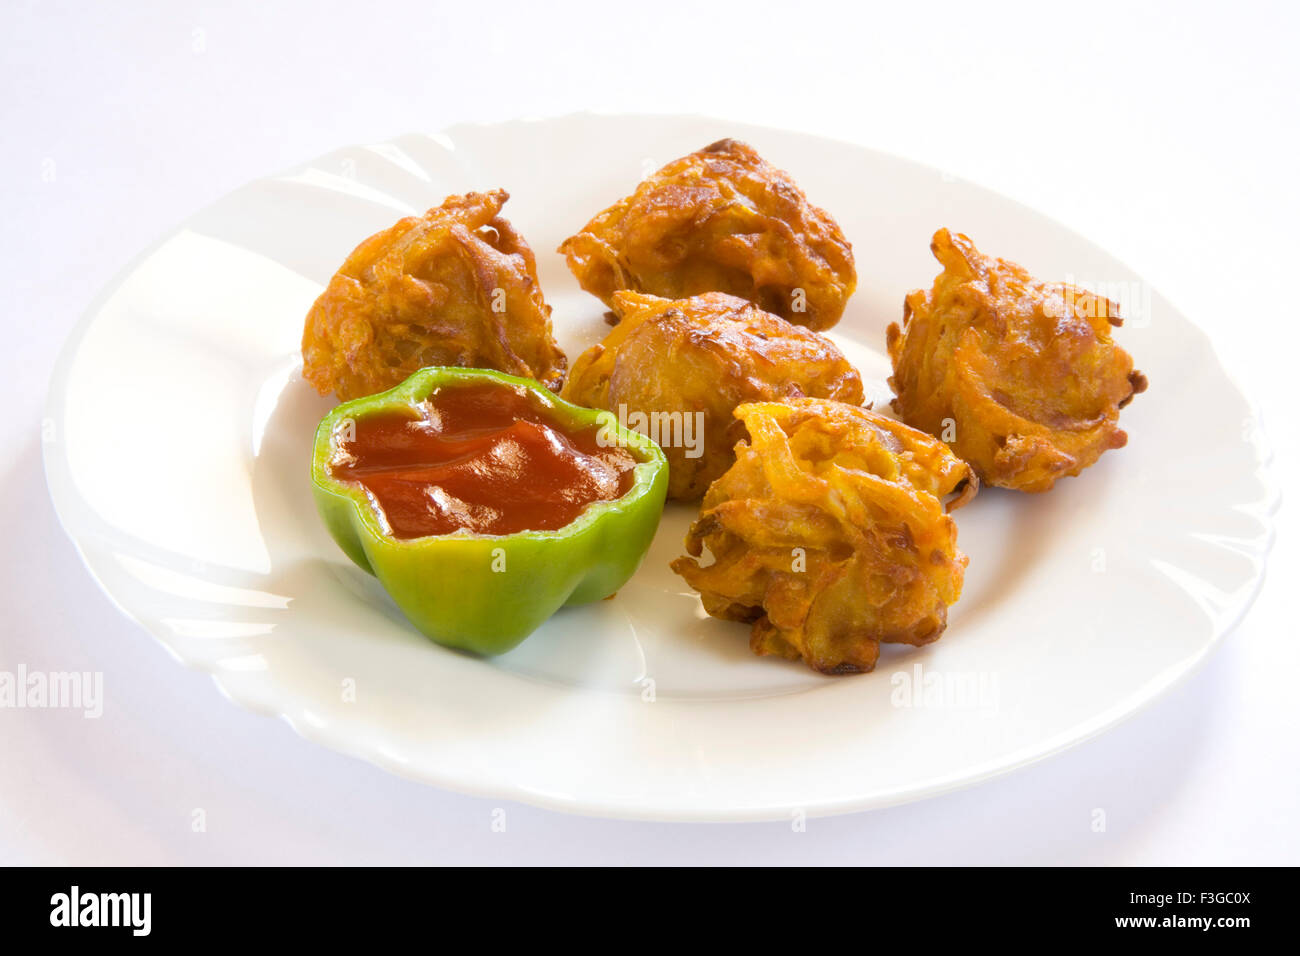 Indian fast food fried kanda bhaji served with tomato ketchup in plate ; India Stock Photo